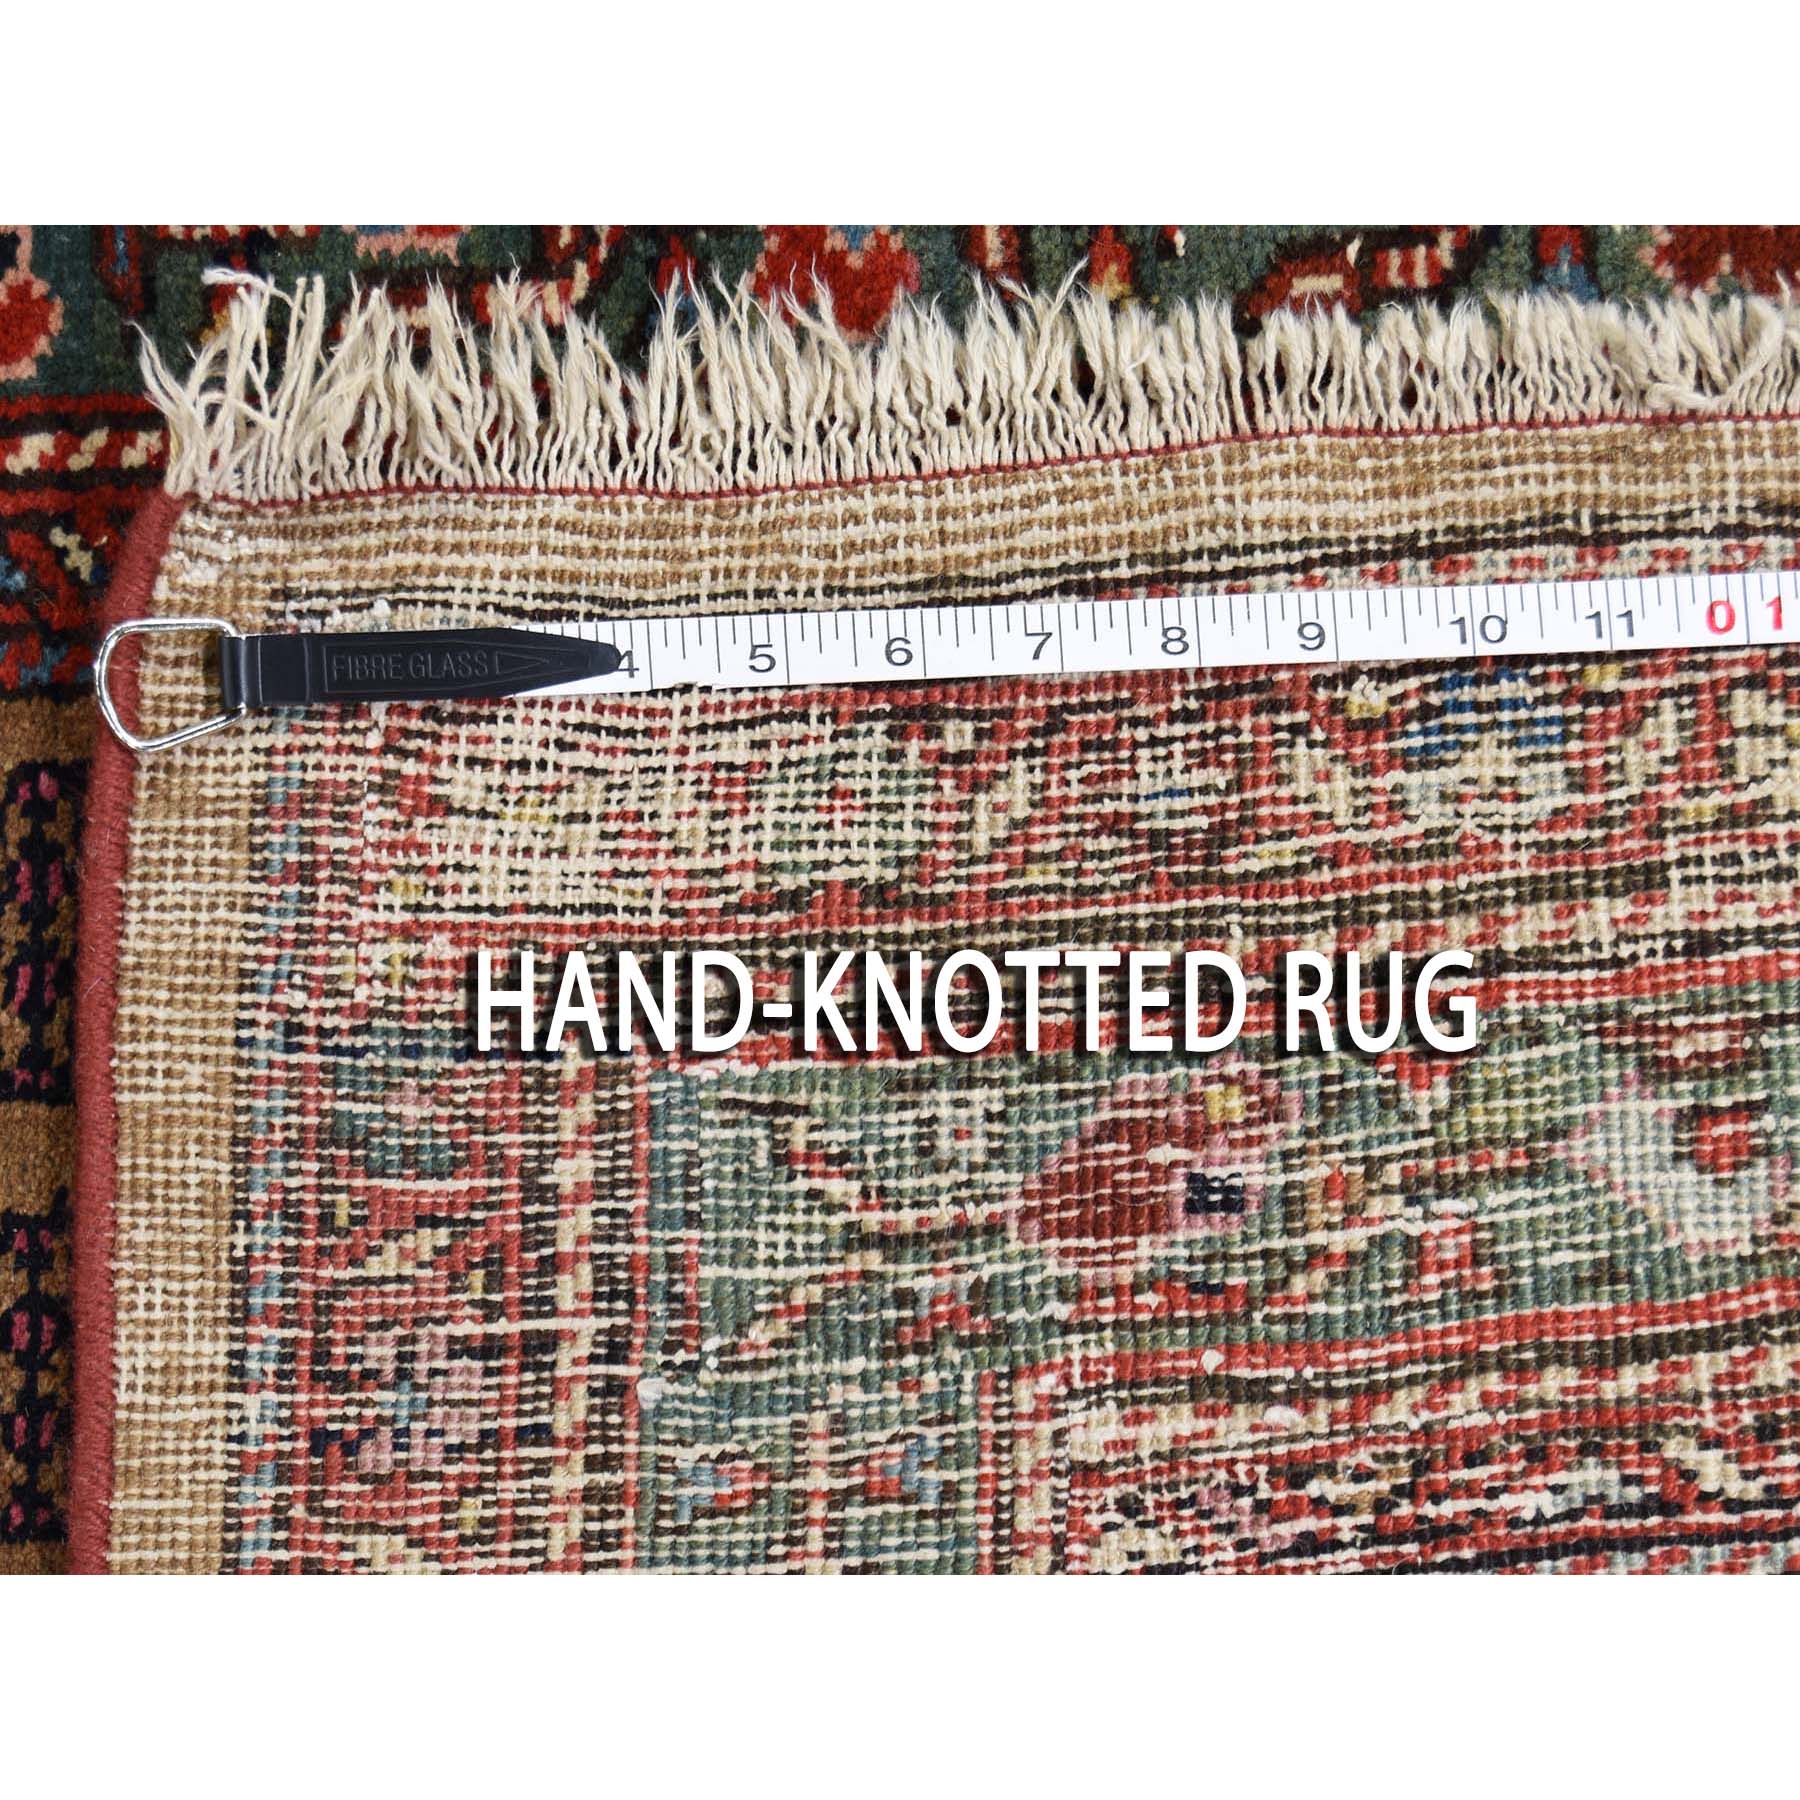 3-3 x13- Antique Persian Heriz Worn Pile camel Hair Some Wear Runner Hand-Knotted Oriental Rug 